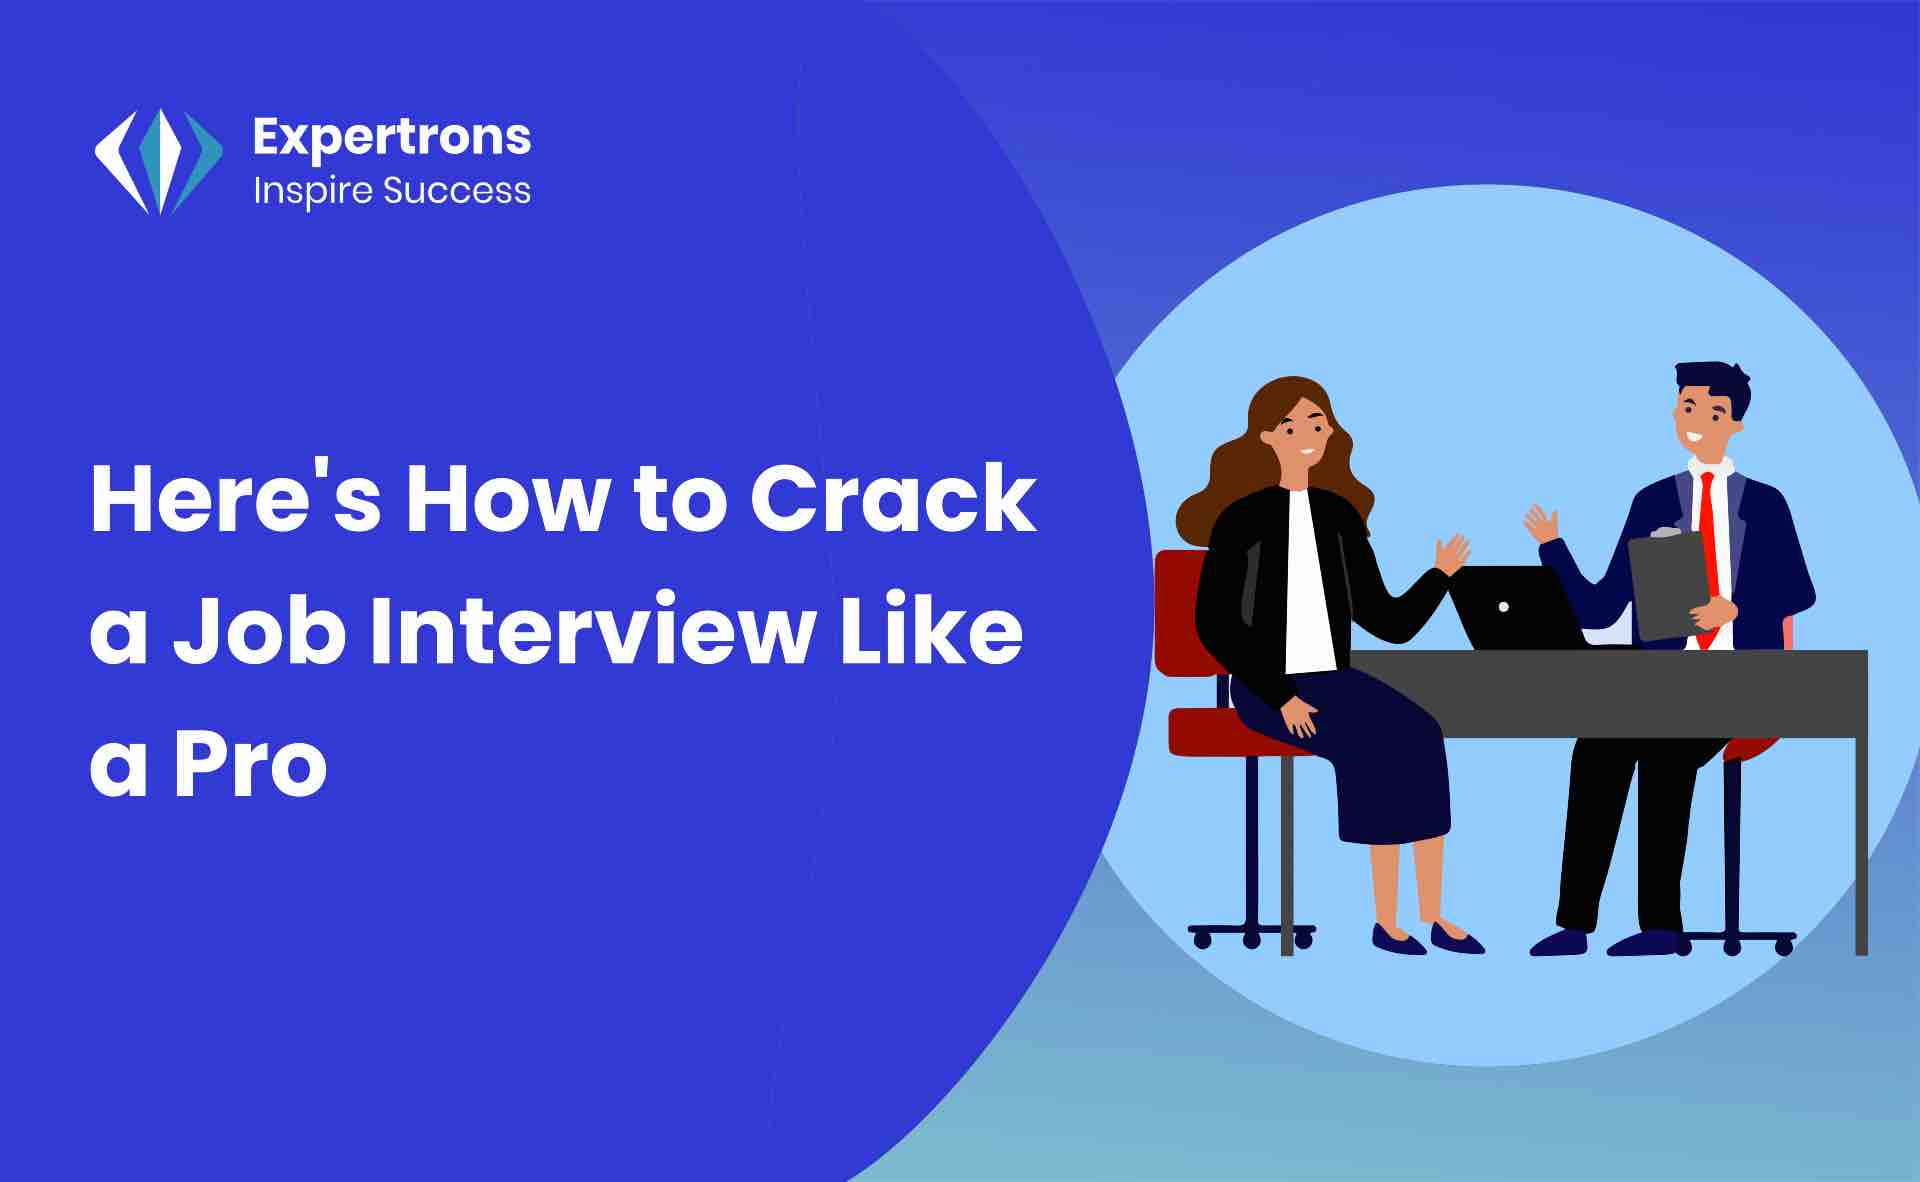 career counseling online, job interview, interview, career guidance, interview preparation, virtual interview, mock interview, common interview questions, interview tips